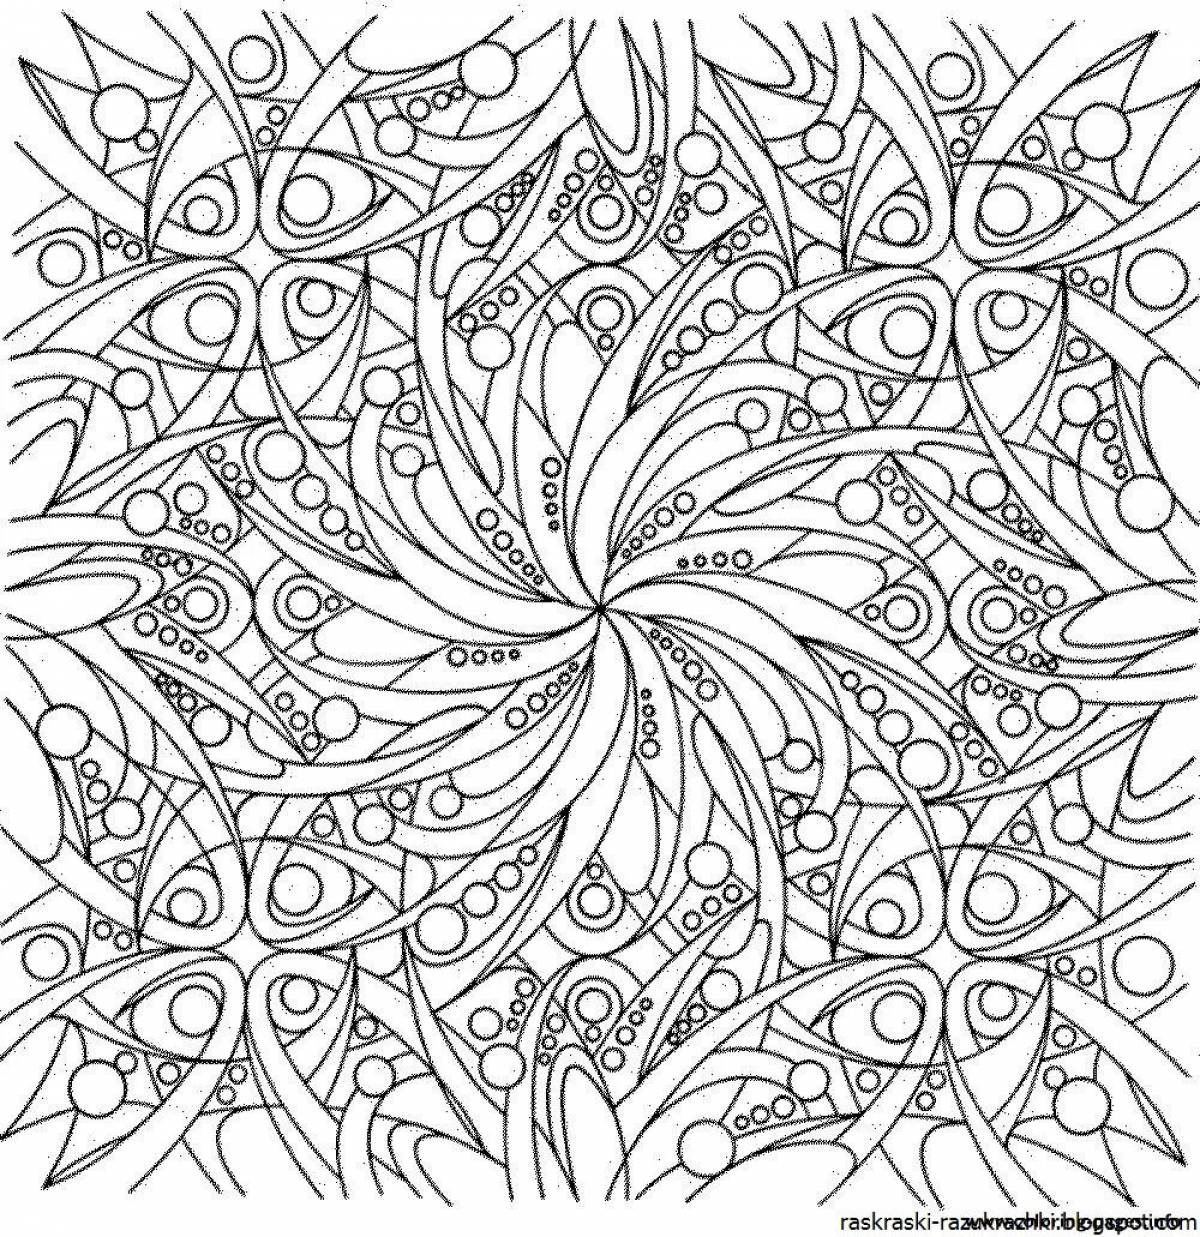 Colorful psychological coloring book for inquisitive dreamers